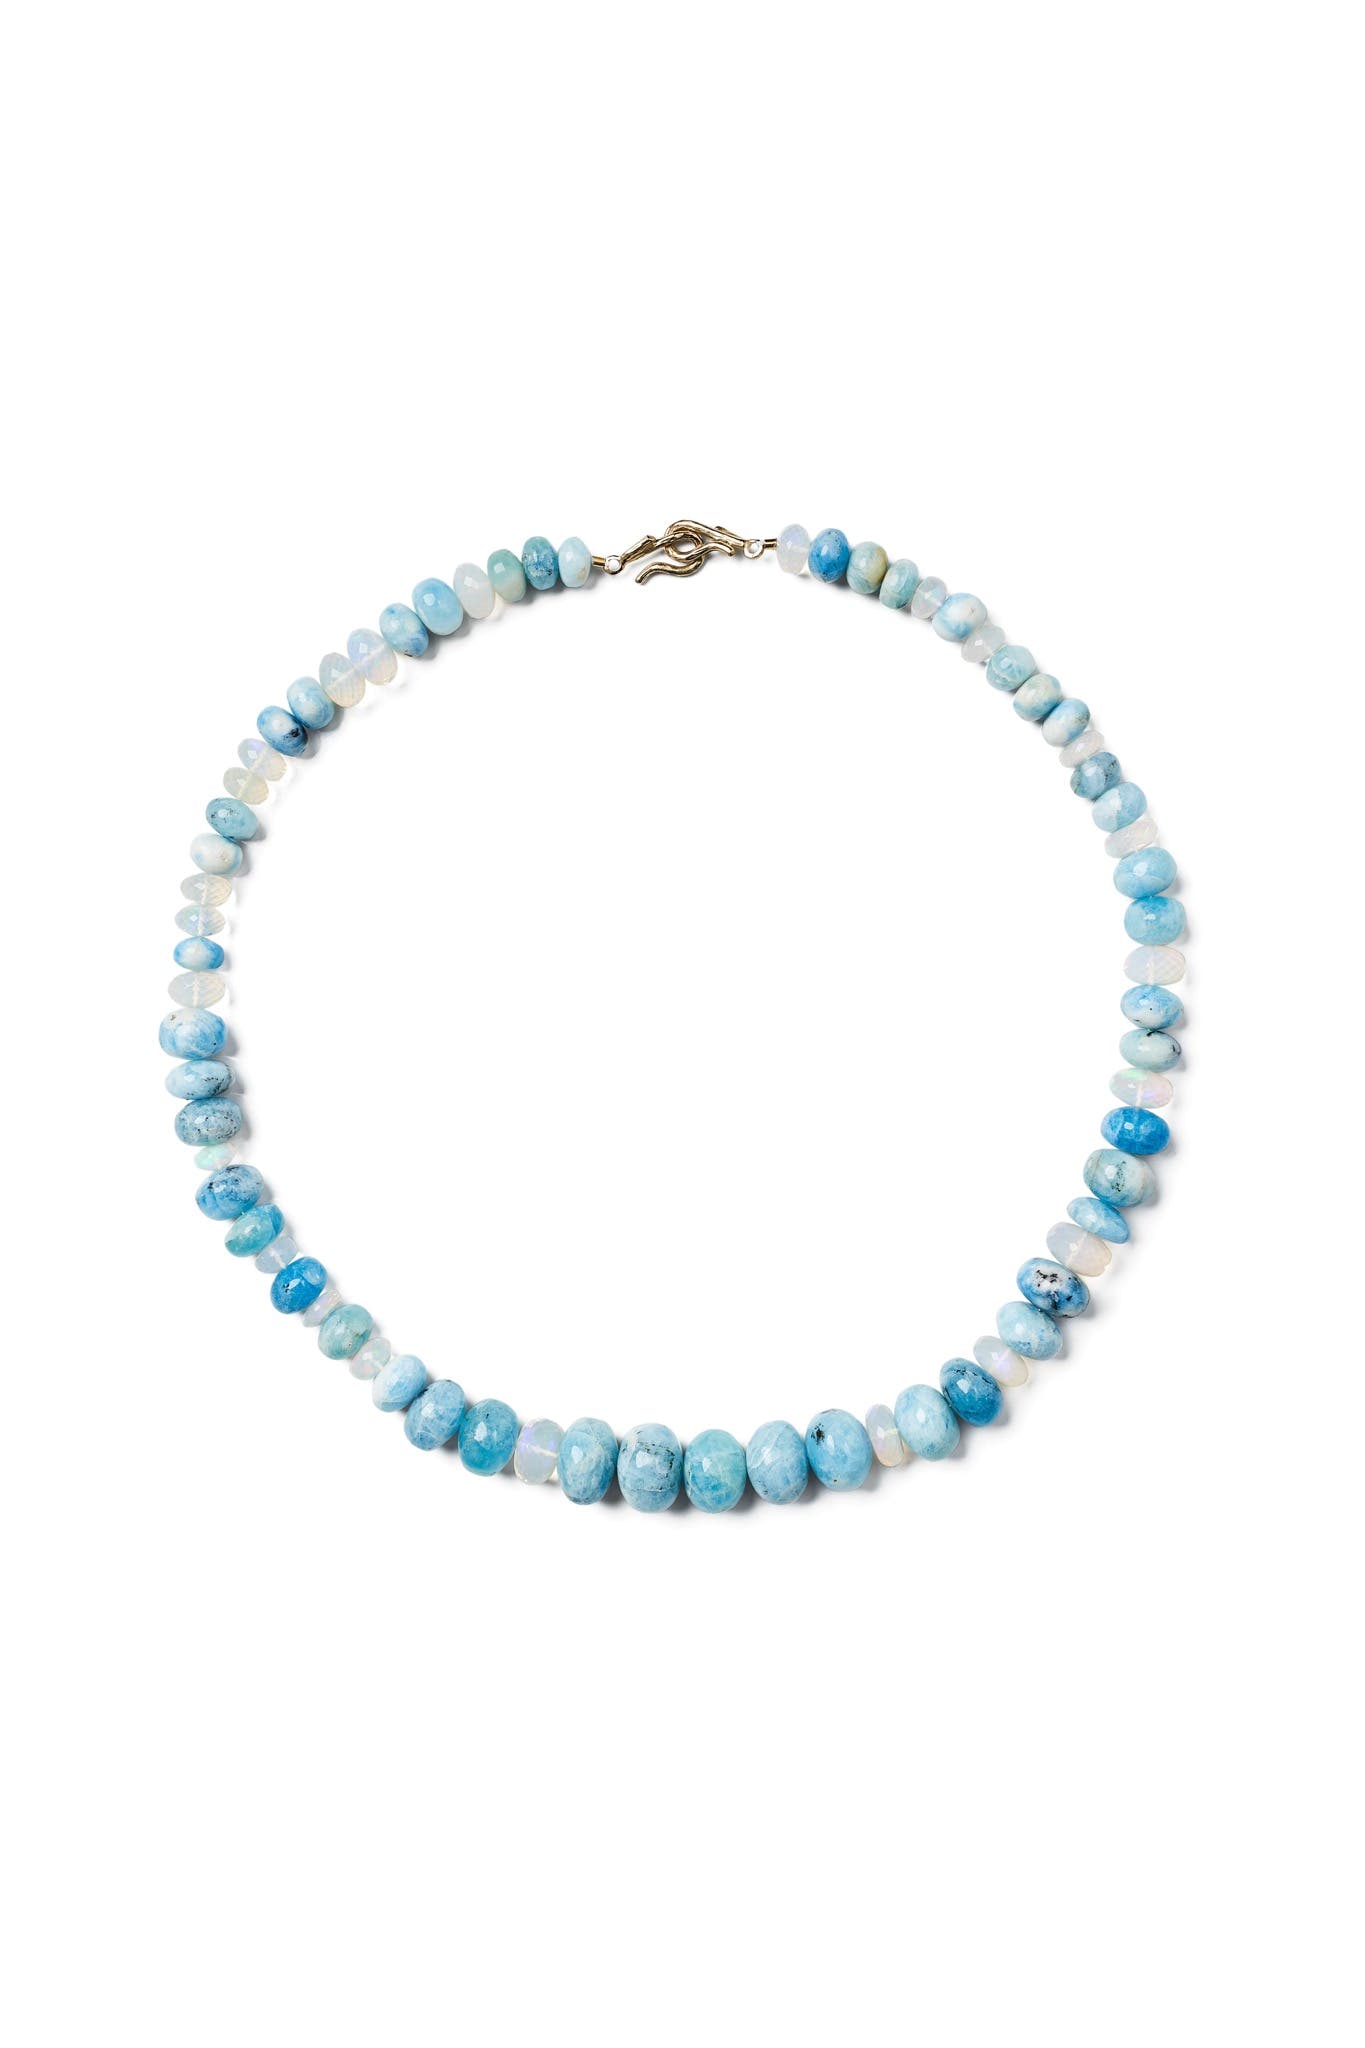 Hackmanite and Opal Necklace